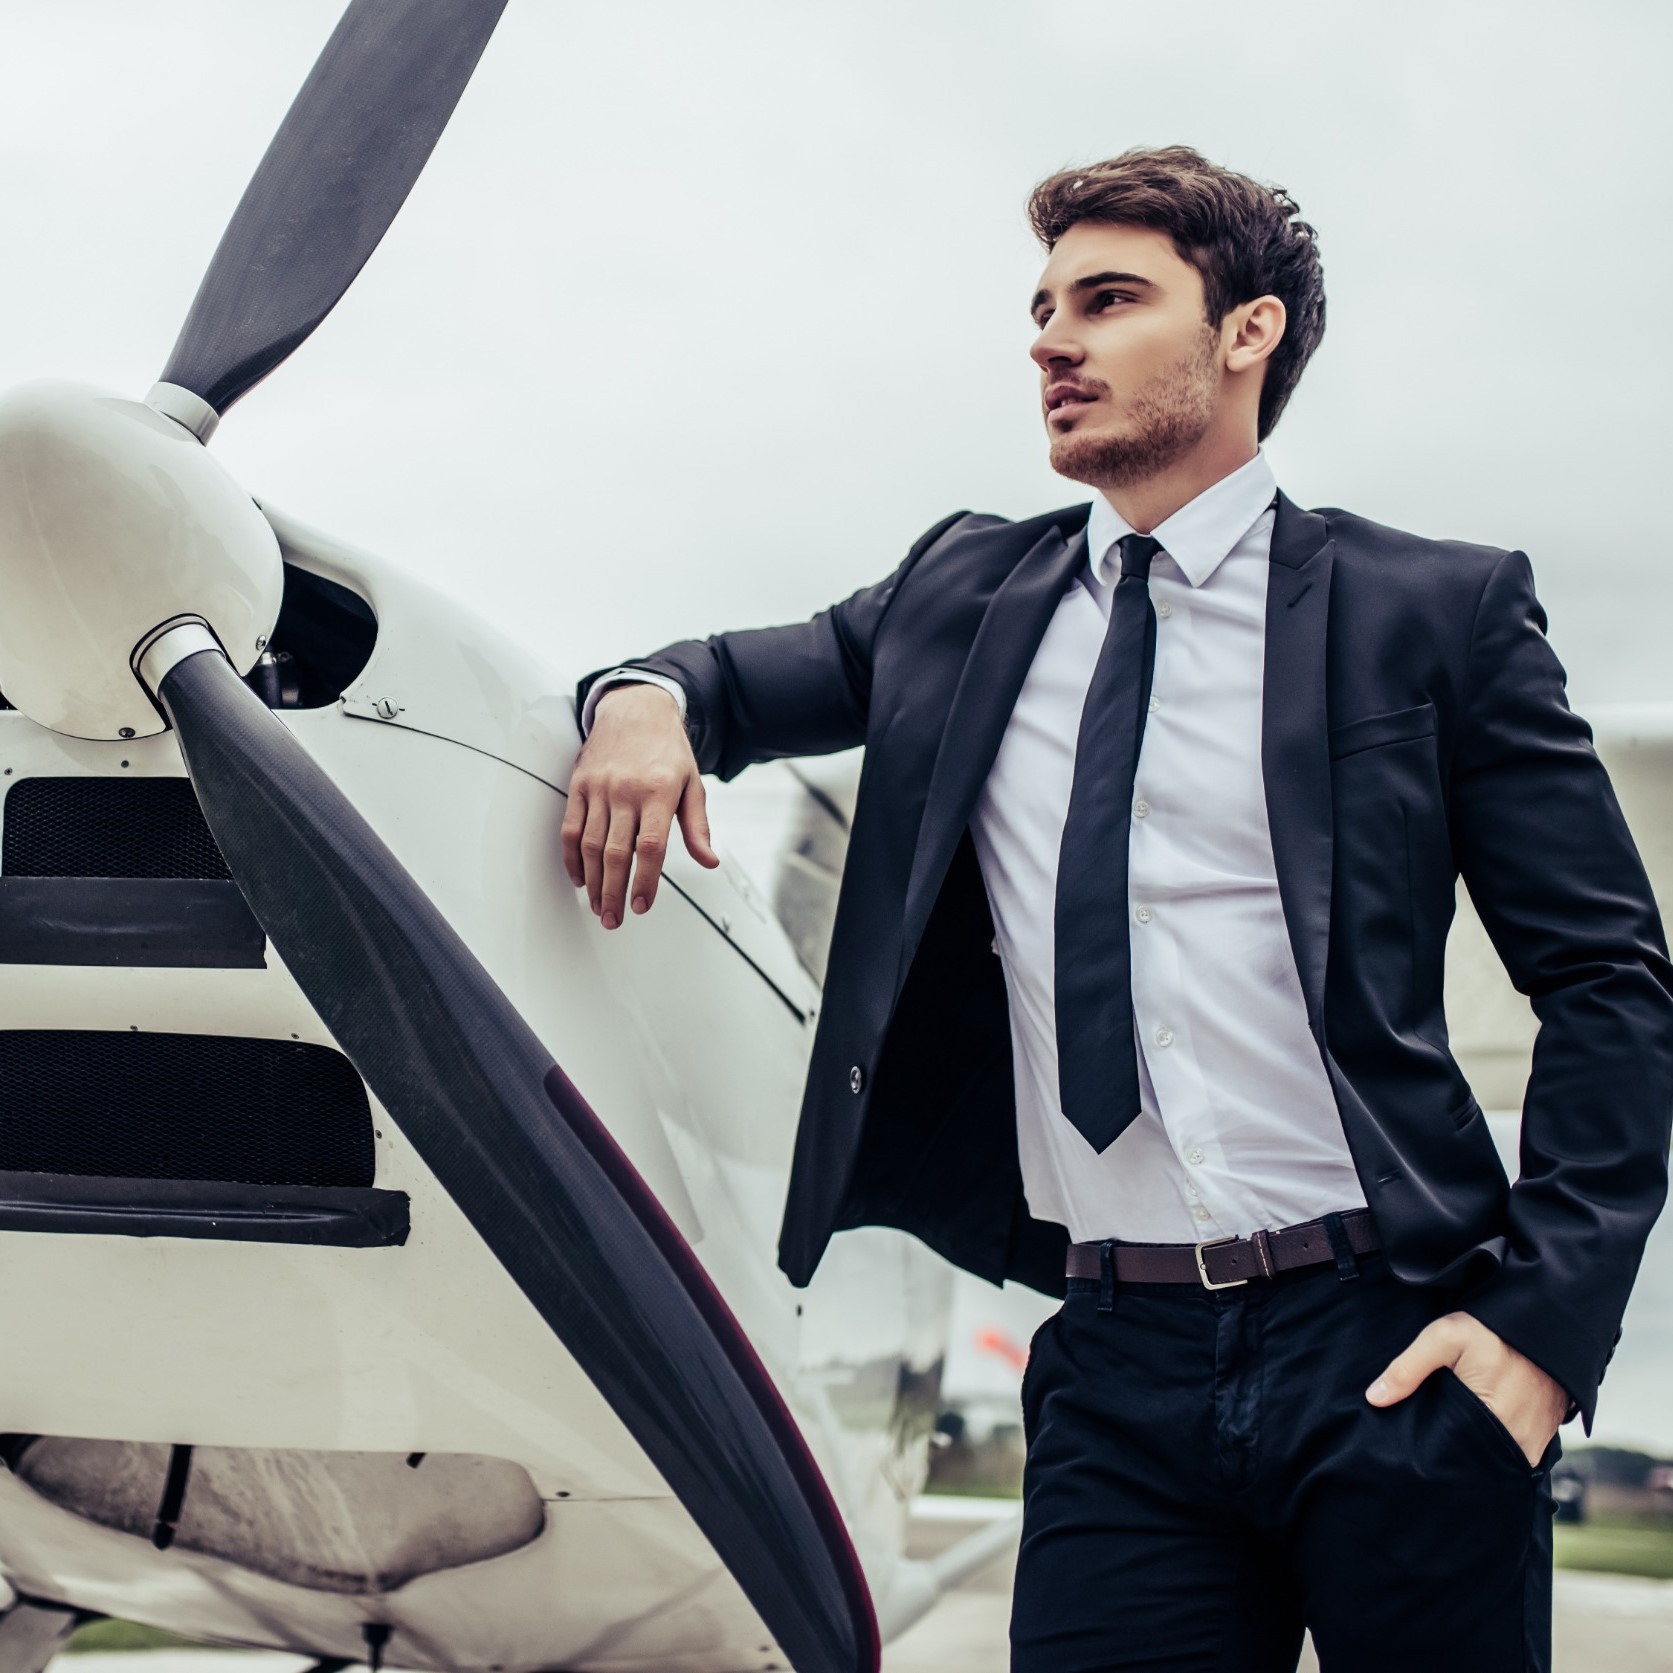 How to become a millionaire in your 20s